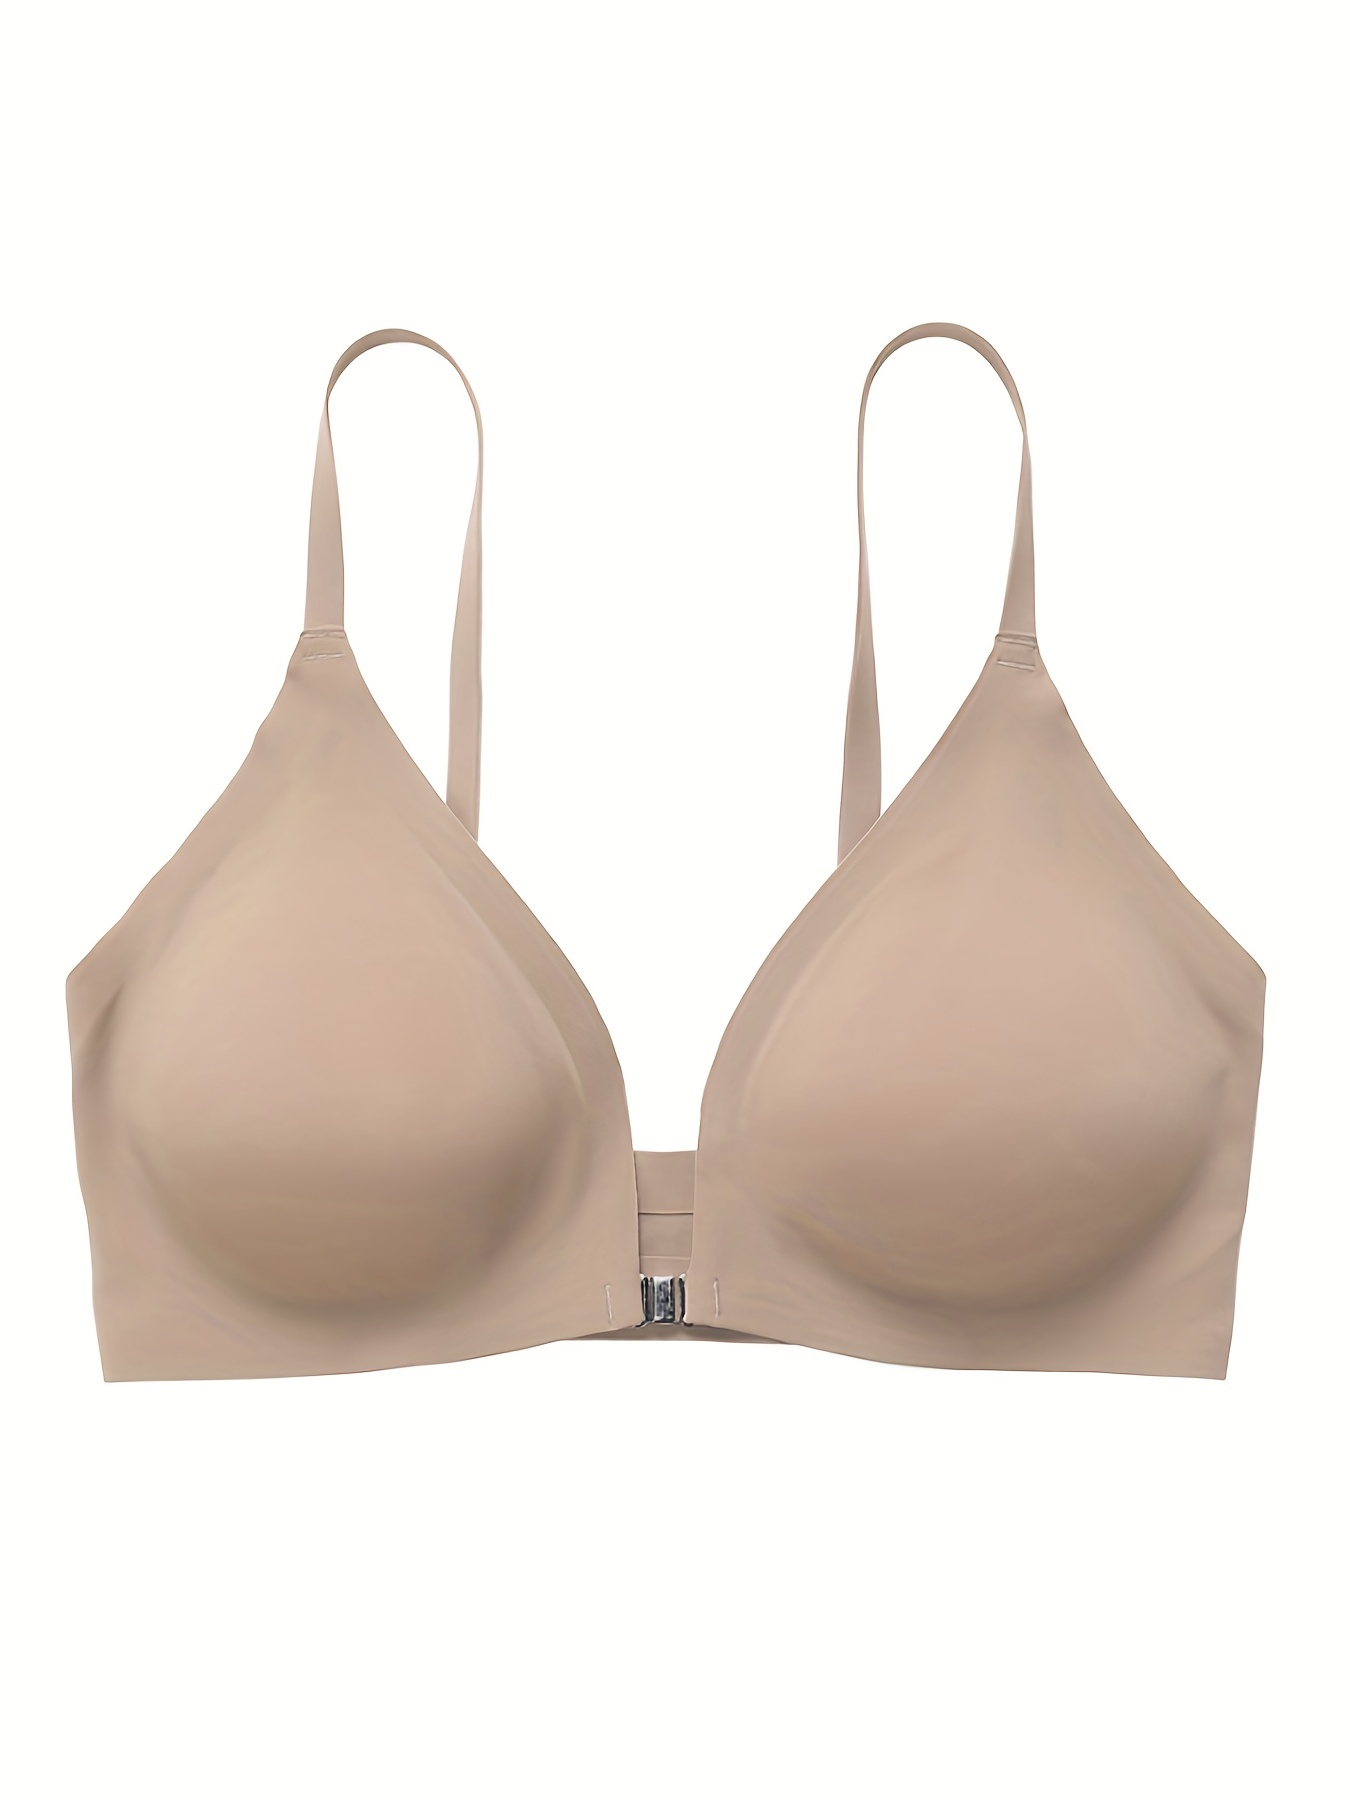 SHOPESSA Front Closure Bras for Women Push Up Comfy Bra Plus Size Womens Bras  Comfortable with Support Everyday Underwear, A1-beige, Medium : :  Clothing, Shoes & Accessories